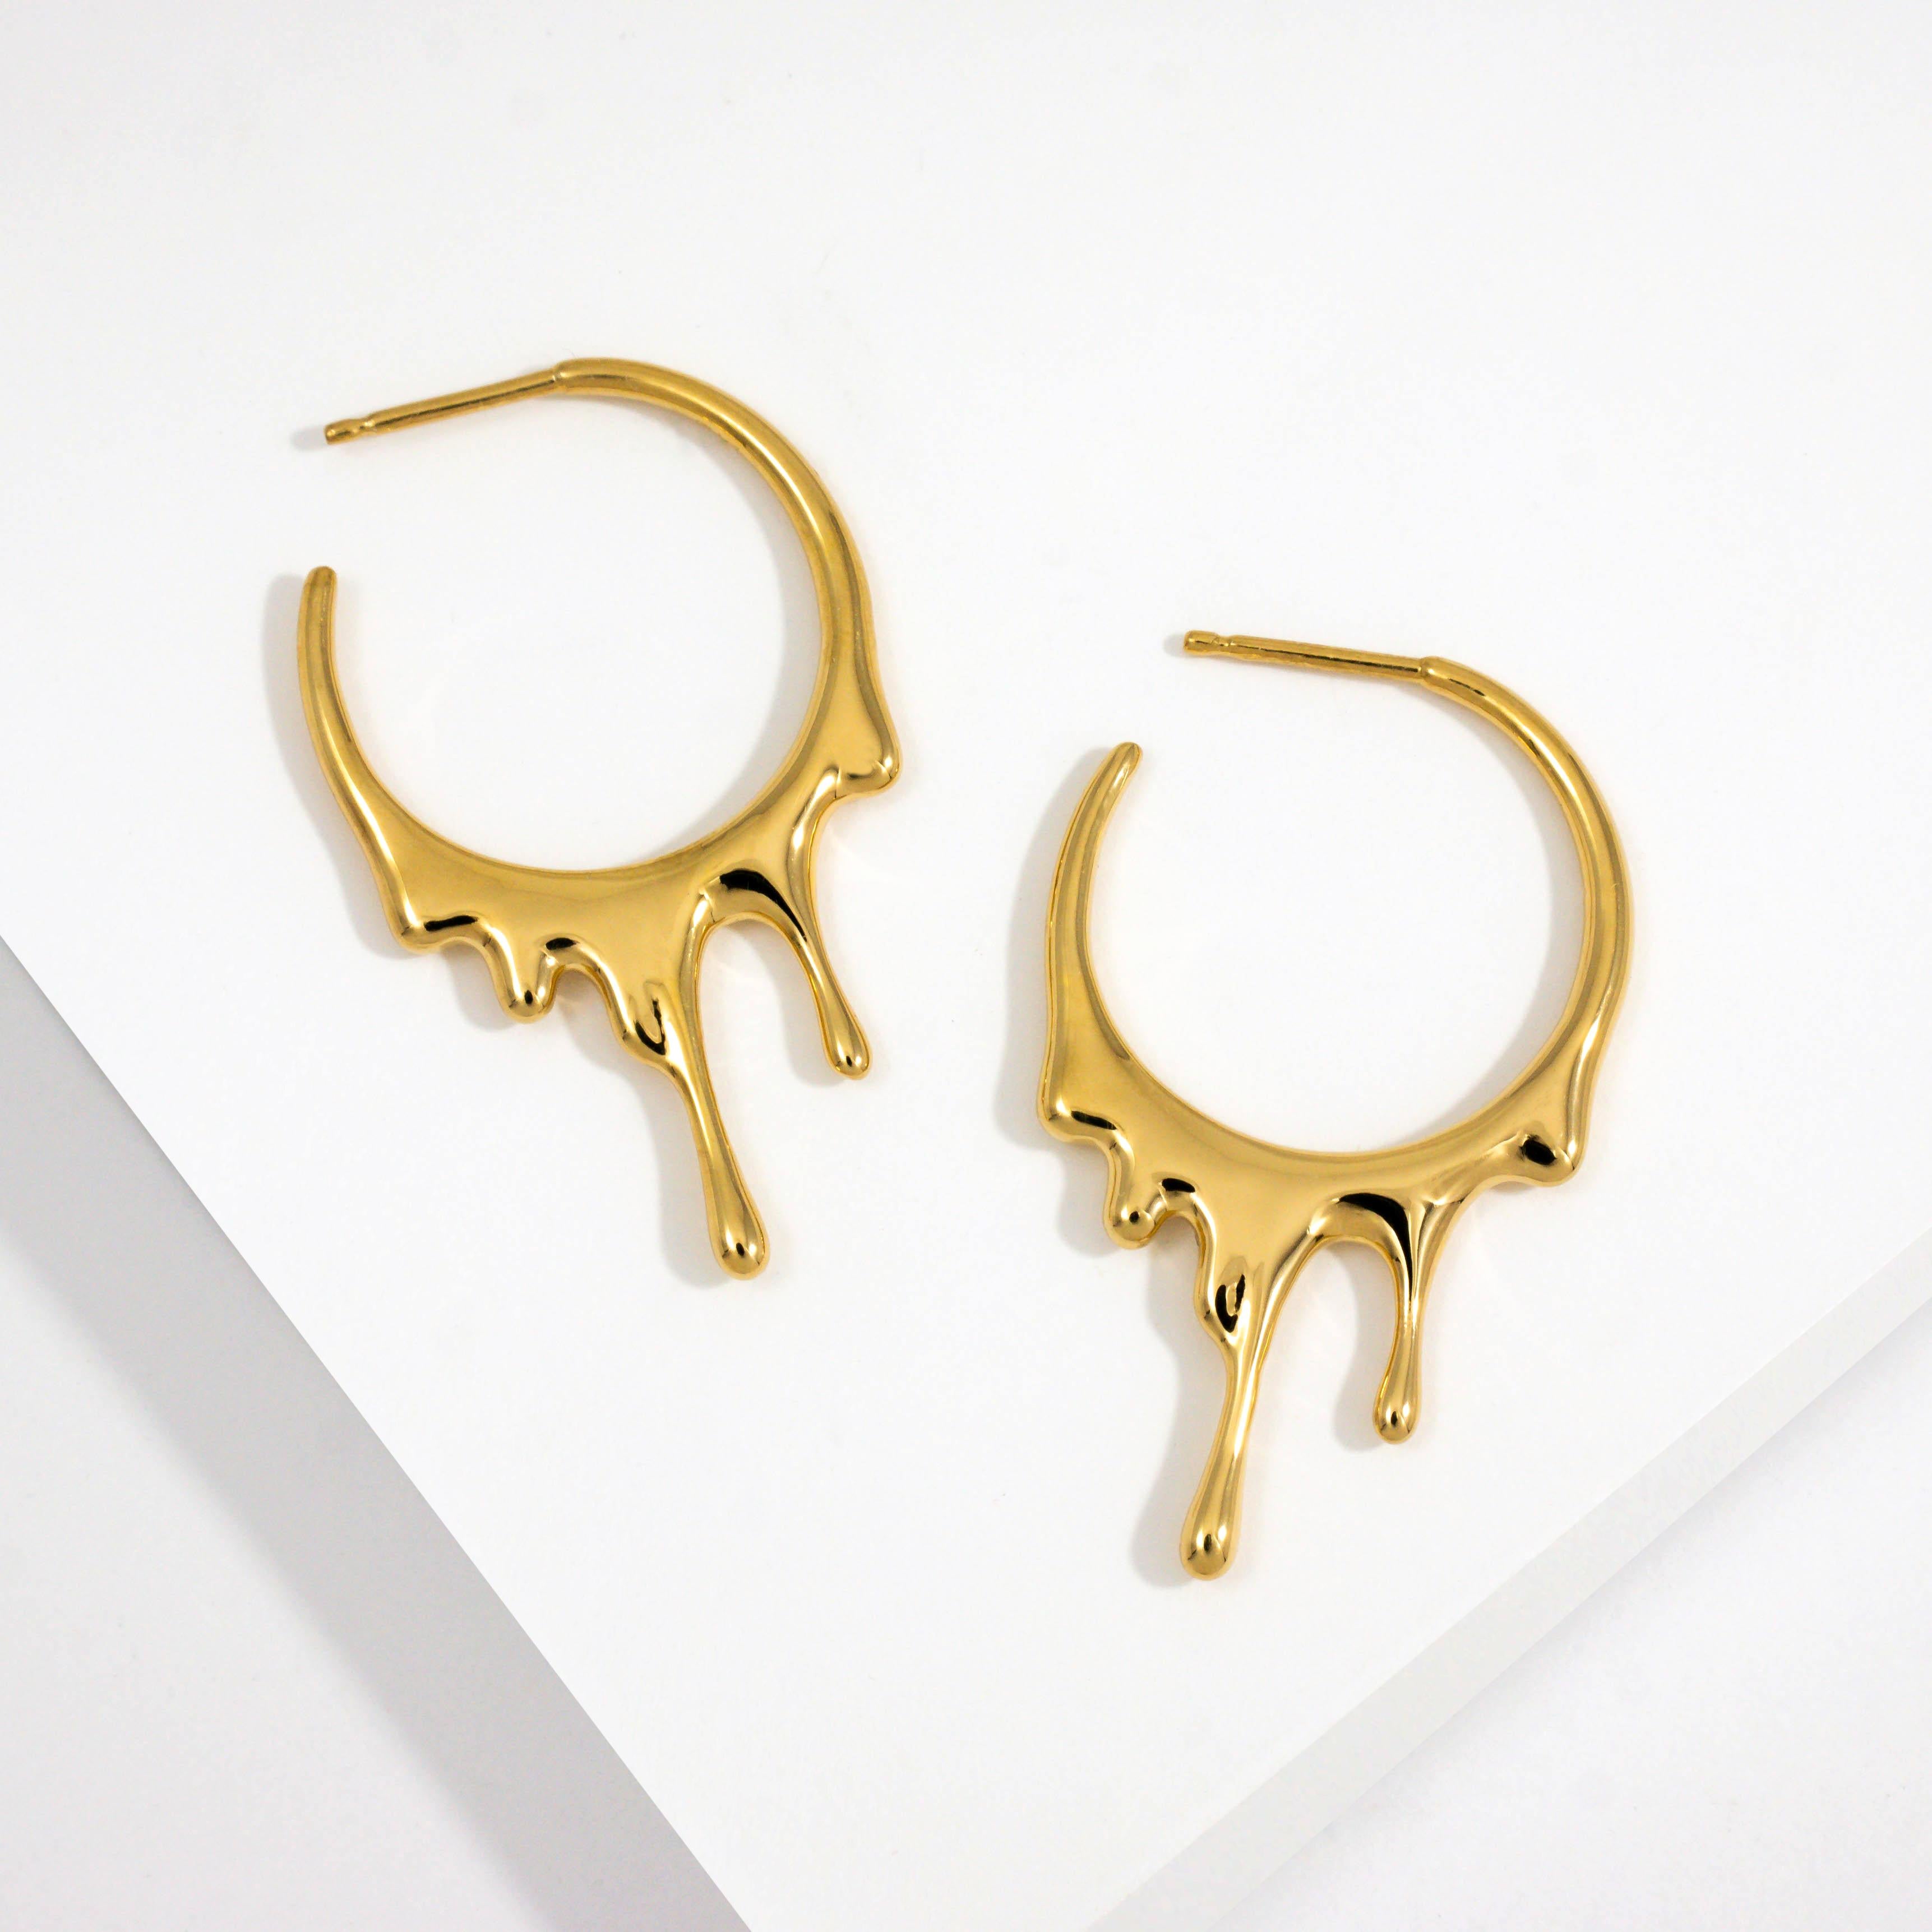 Dripping Circular S  Gold  Earrings

24k Gold Vermeil: Made in 925 Sterling Silver and coated with a thick layer of 24k Yellow Gold to 2.5 Microns thickness

Sold as a Pair with Butterfly and Silicone Earring Backs

Approximately 37mm (1.5in) High